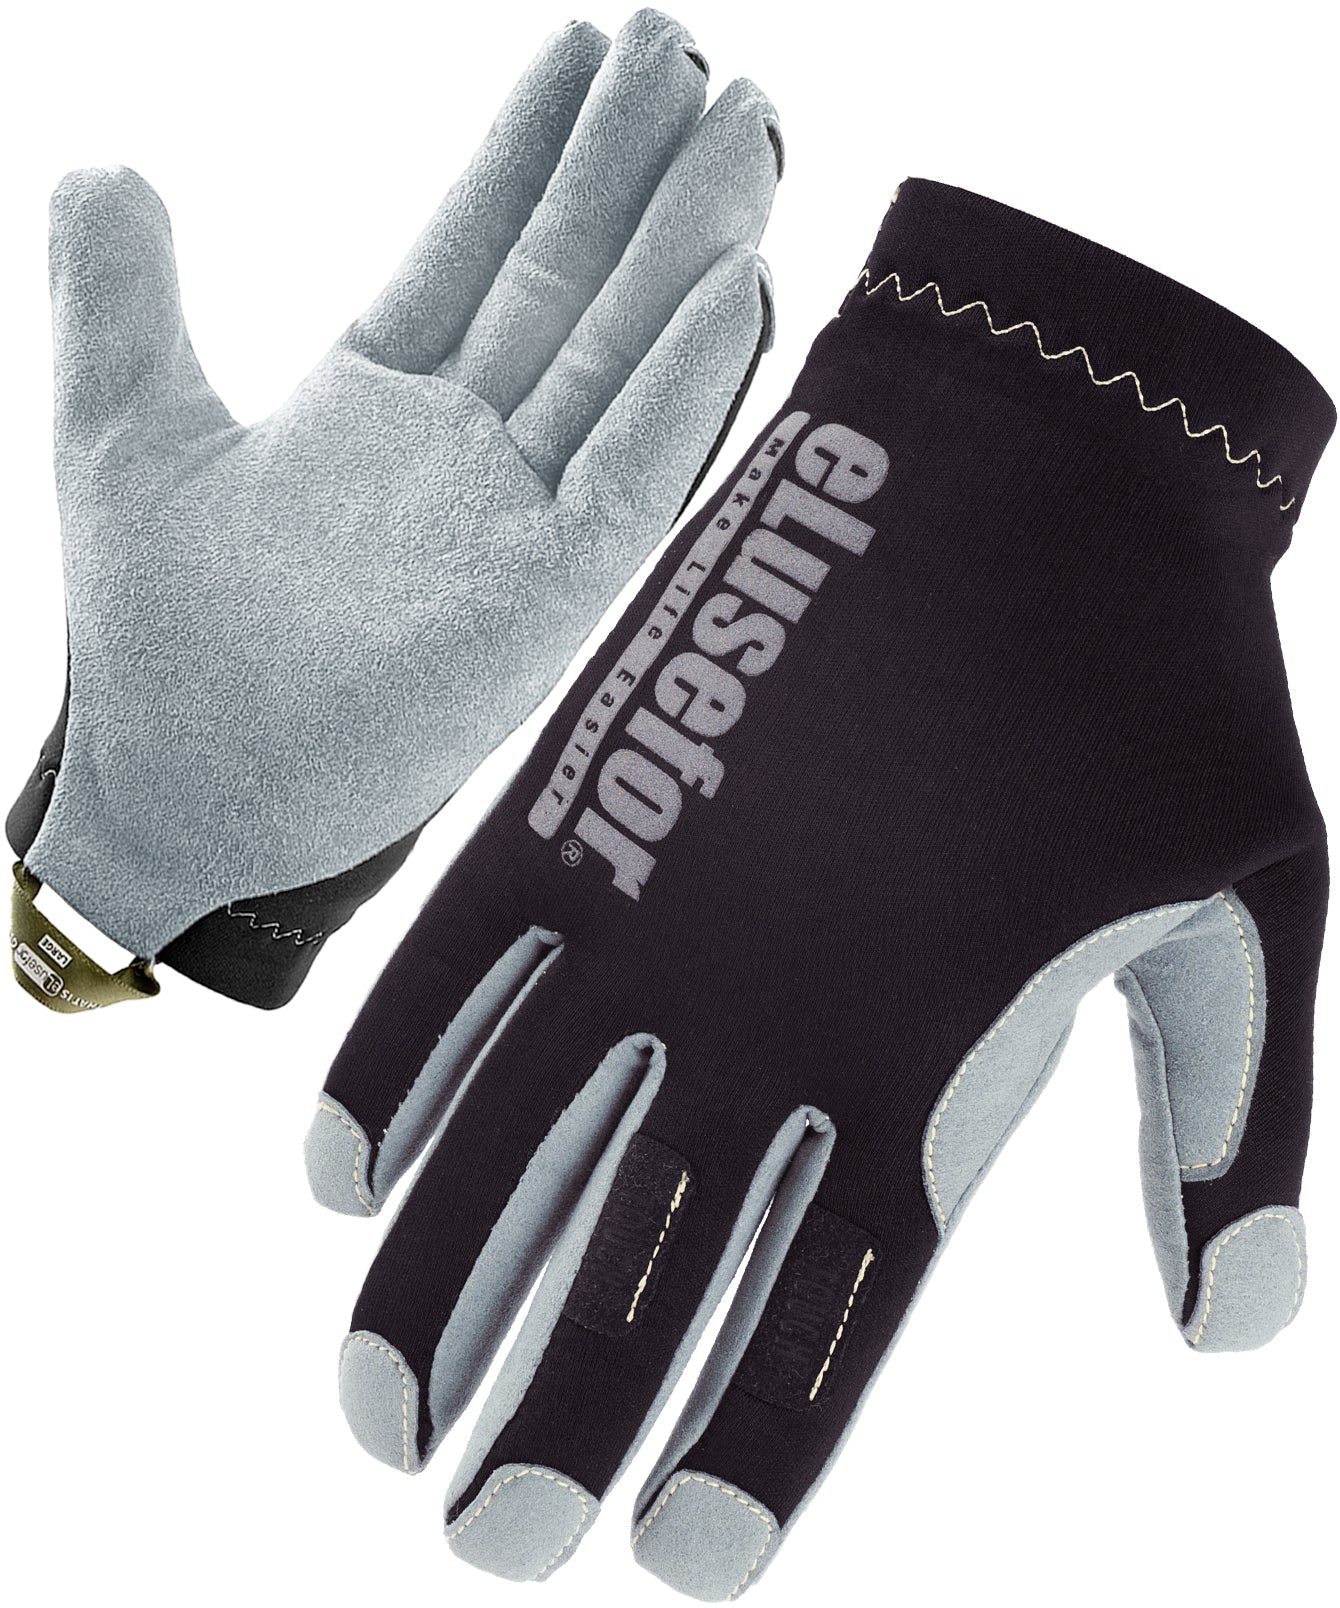 Easy Fit Men's Gloves, .55mm Soft Palm, ClickPoint Touch, No for Badges, Black/ Grey